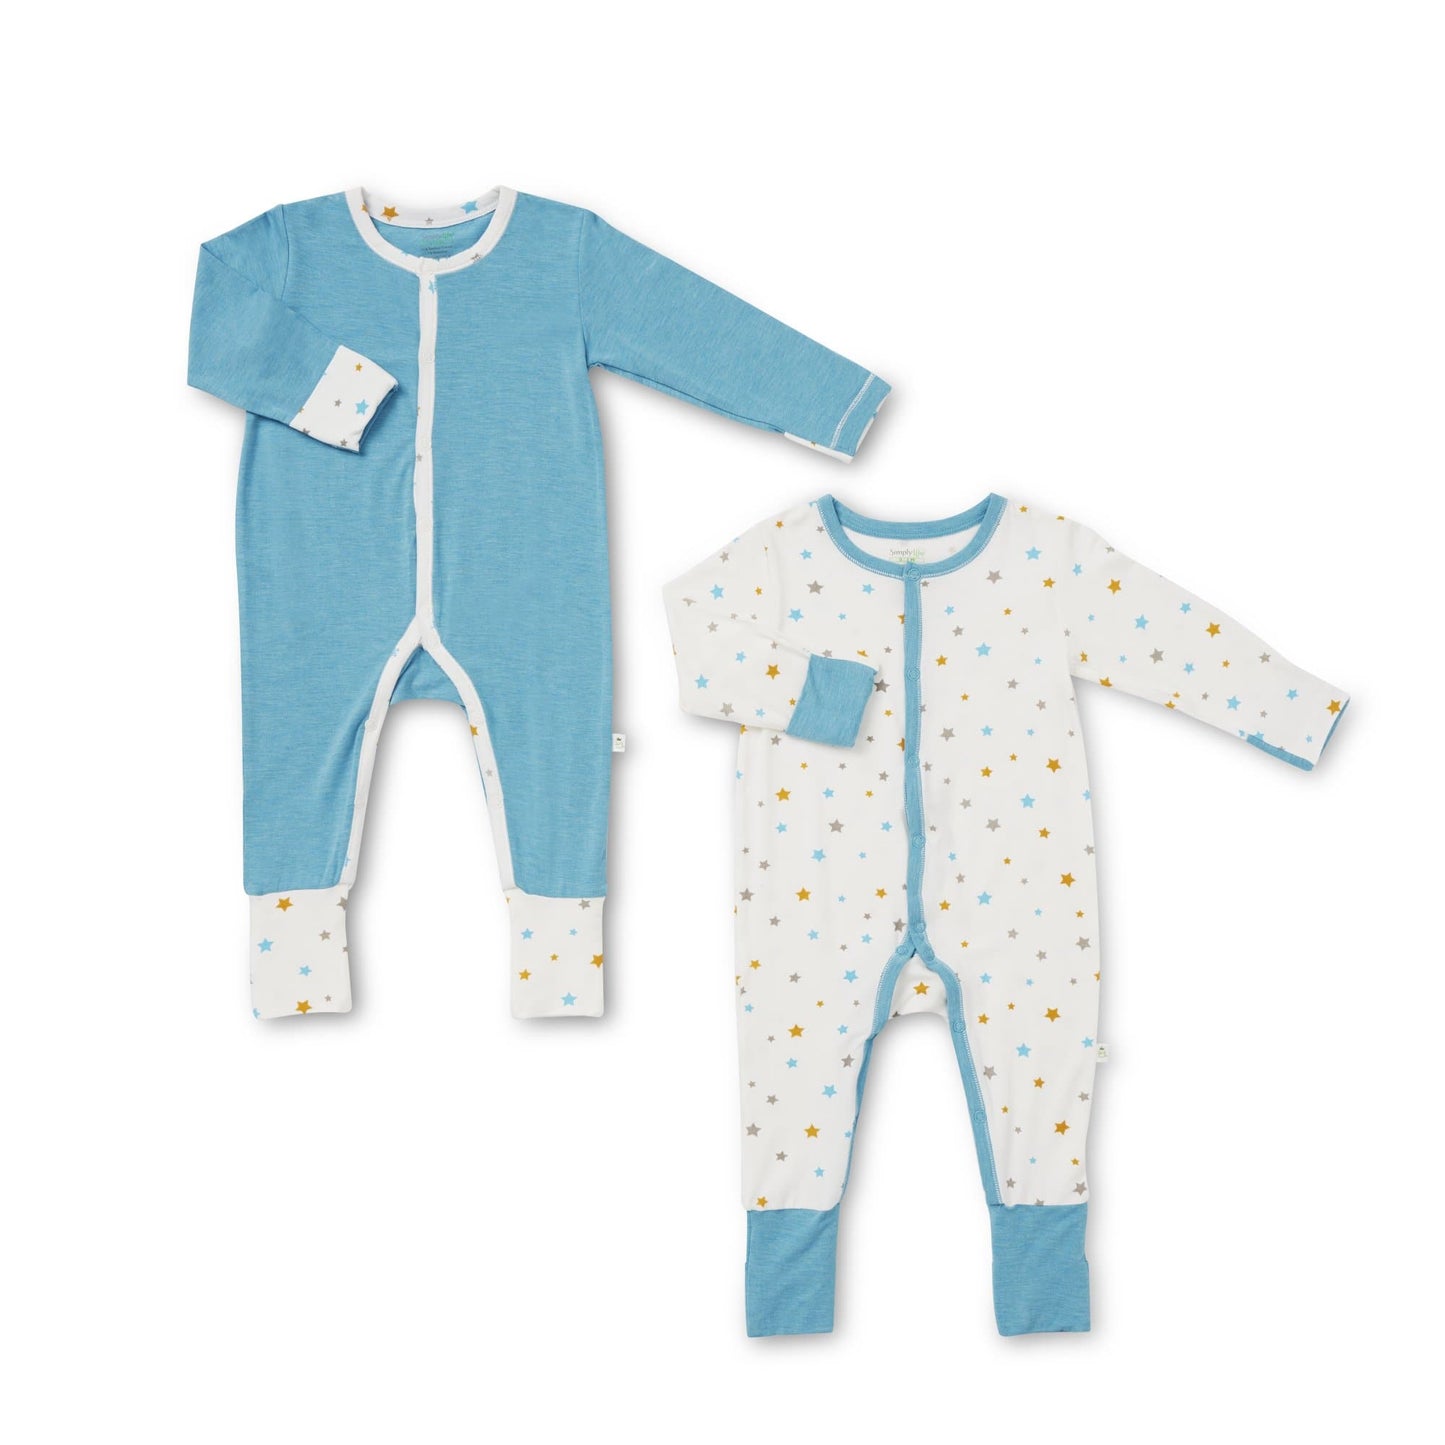 Blue Stars and Sandwash Lagoon Blue - Long-sleeved Snap Button Sleepsuit with Convertible Cuffs / Mittens & Footie (Value Pack of 2)